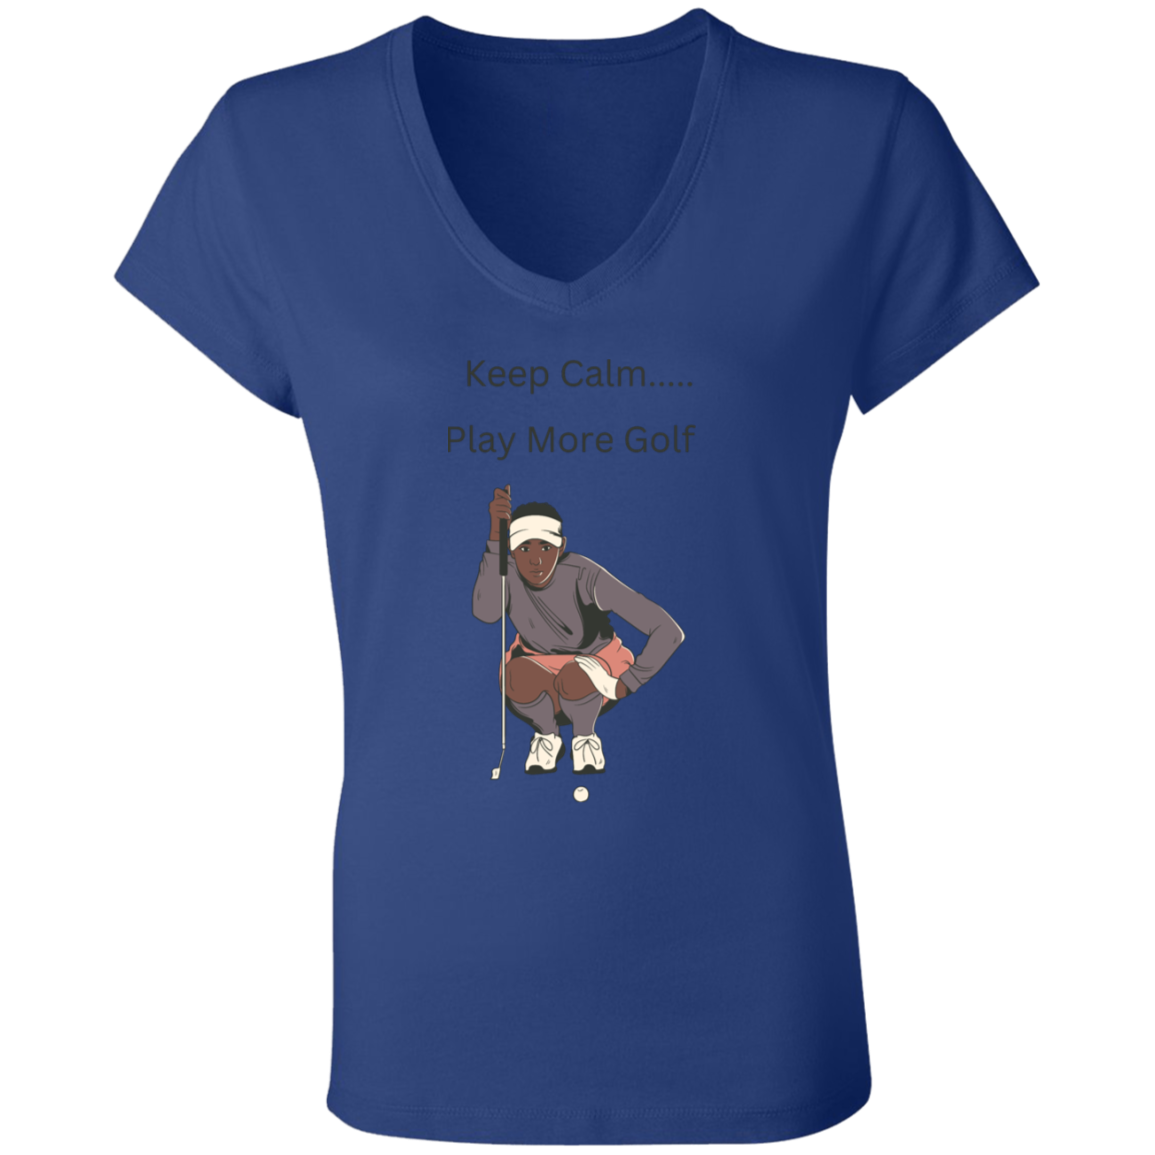 Roo$ter Brand Ladies' Jersey V-Neck T-Shirt Stay Calm Golf